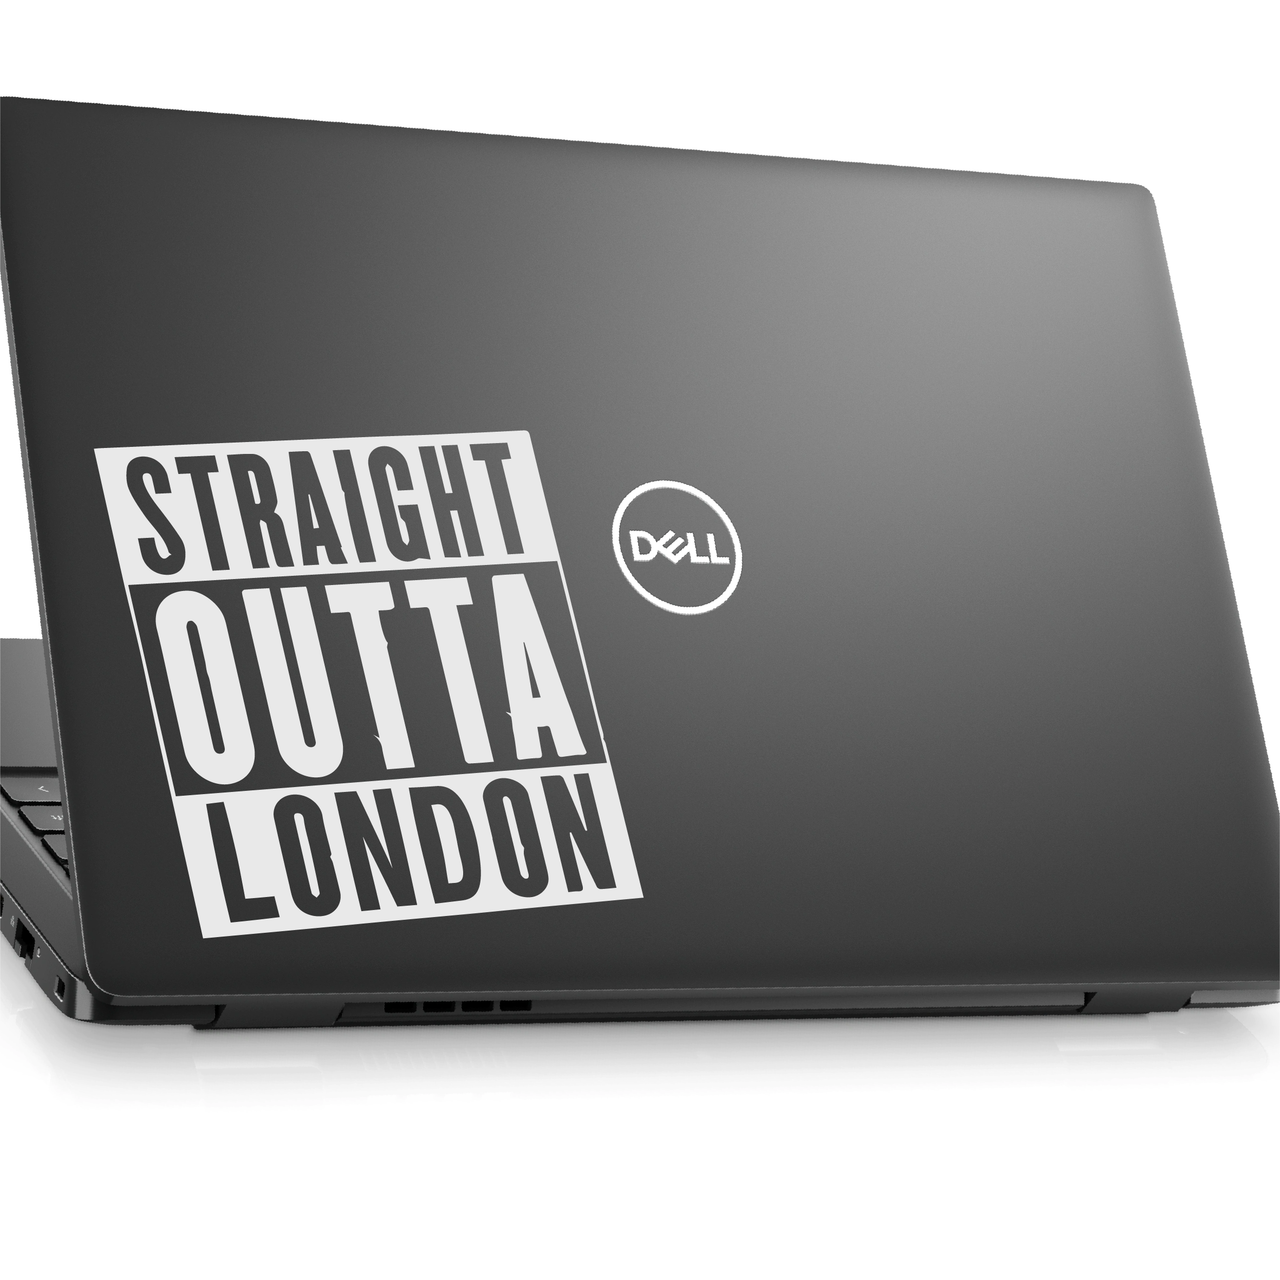 Straight Outta London Laptop Decal